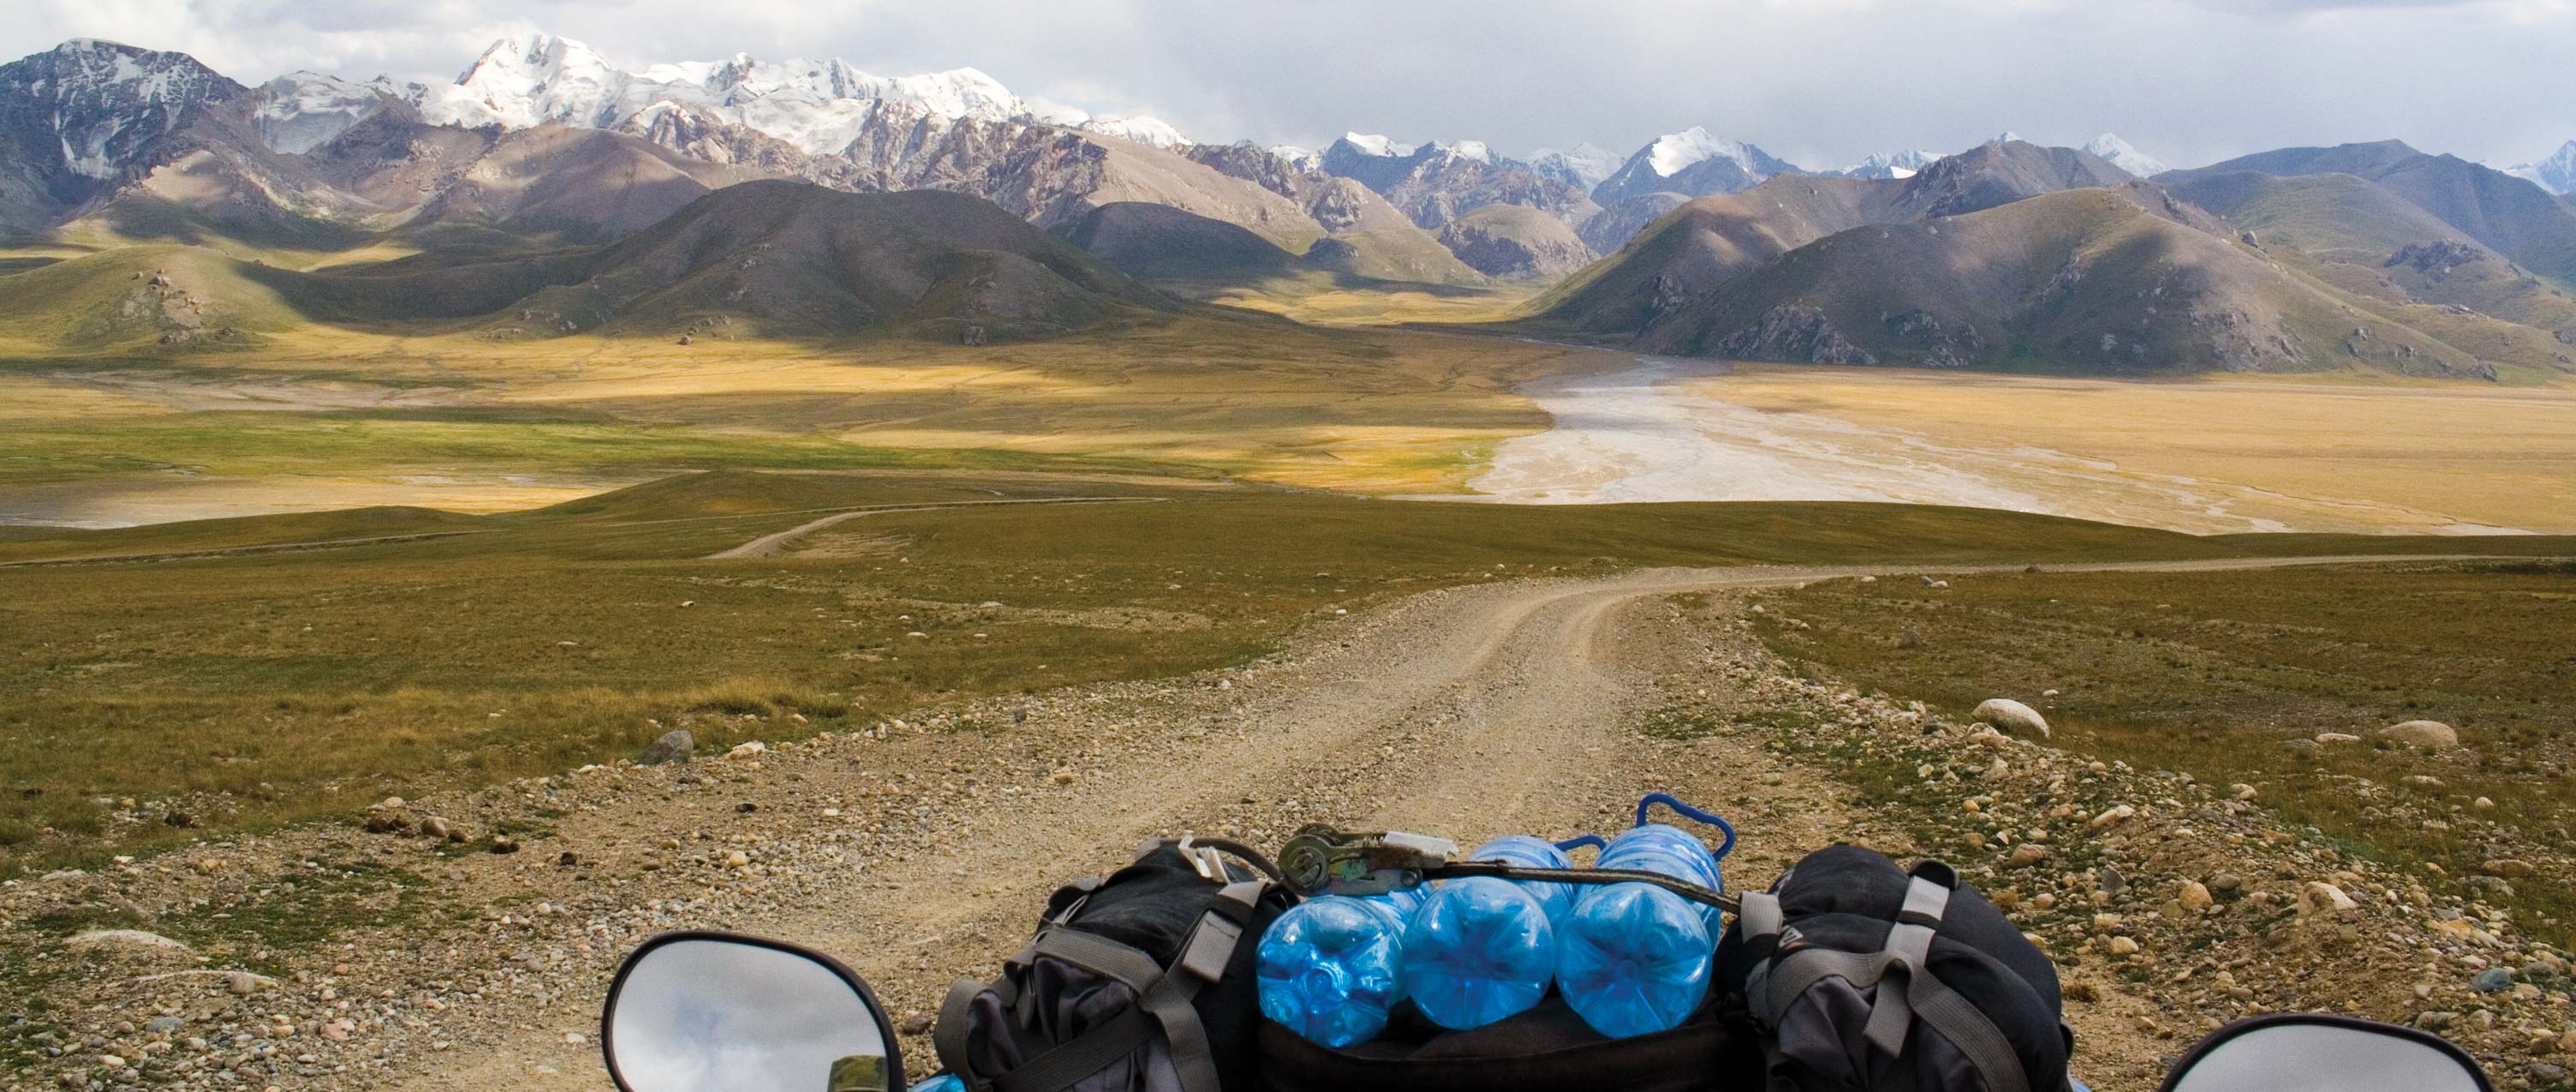 Discover the Silk Road on your own on a quad or ATV